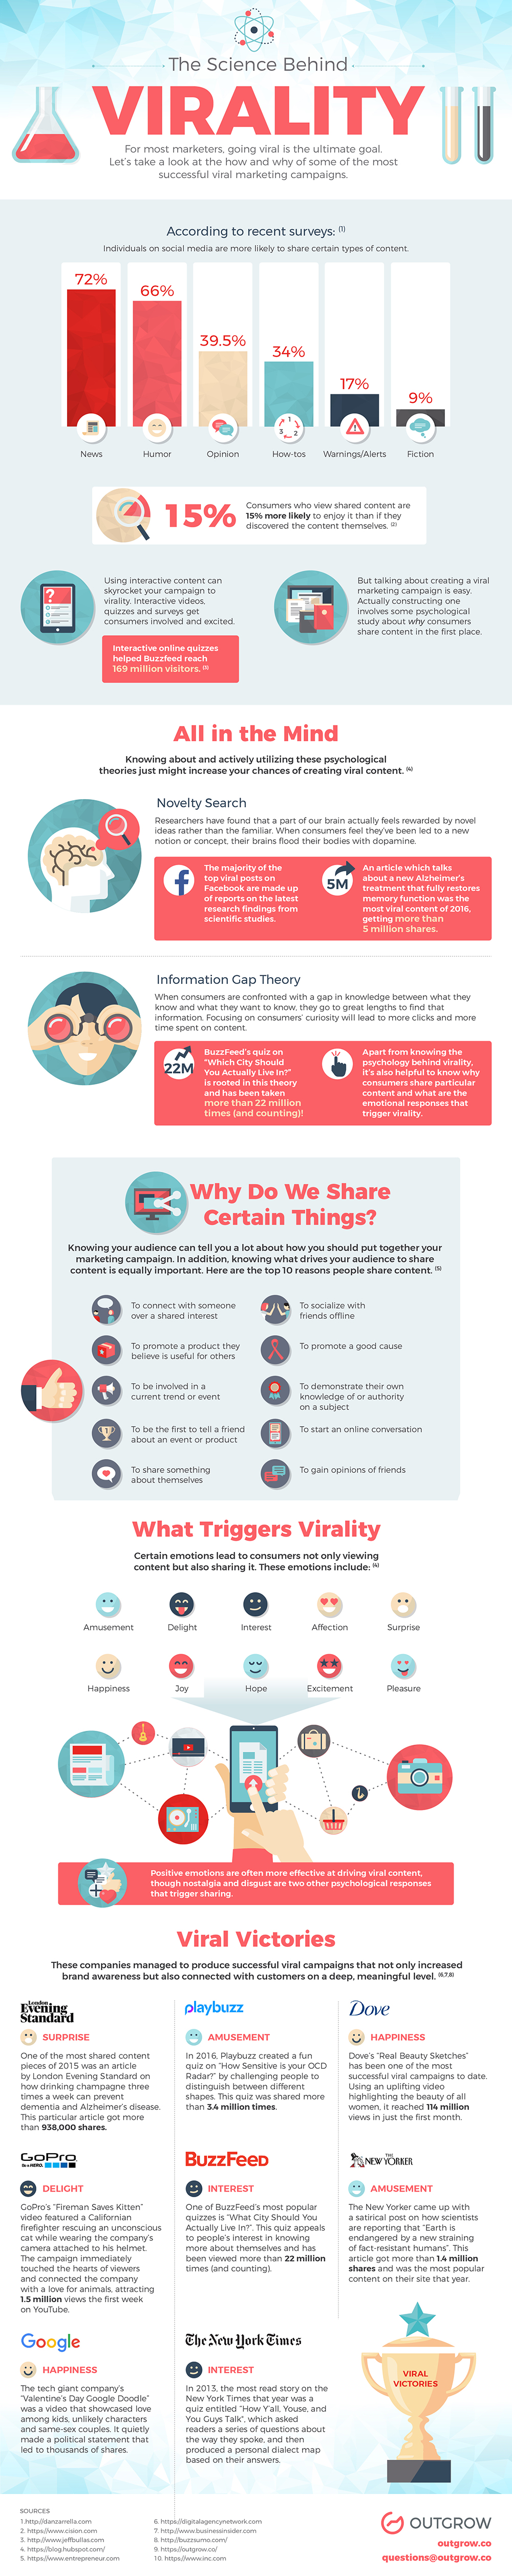 Revealed: The Science Behind Virality